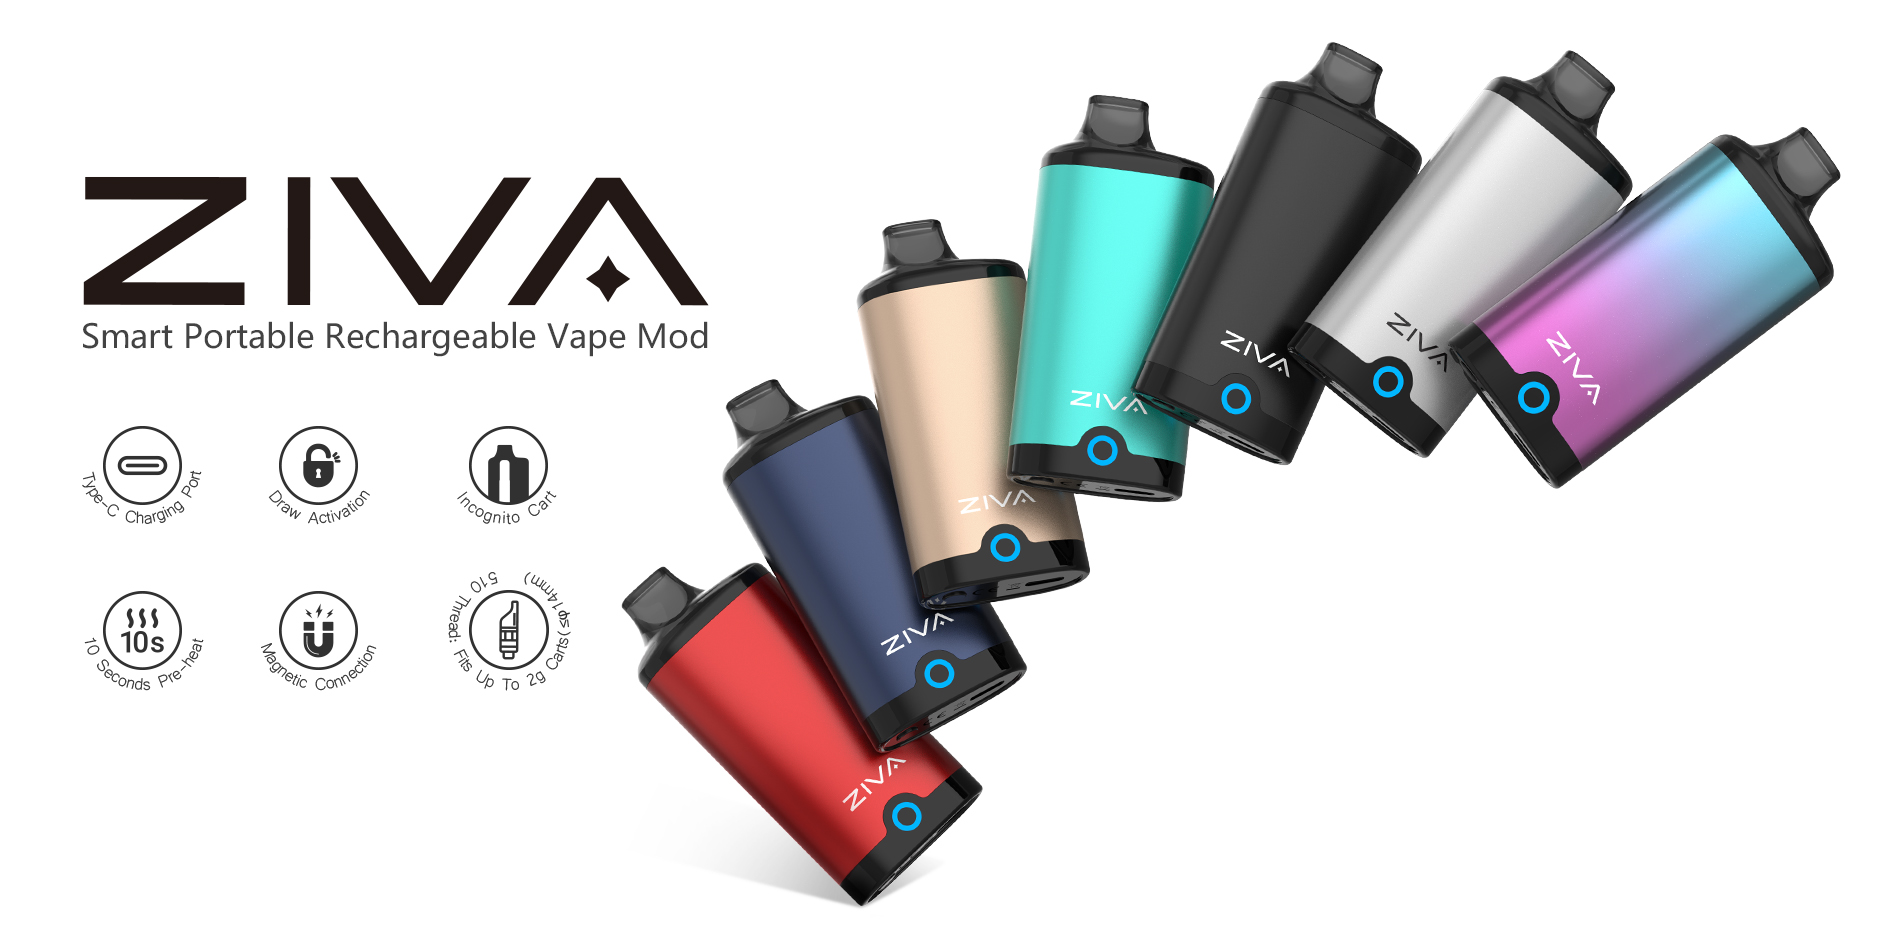 How to choose a vaporizer? Yocan Official News 